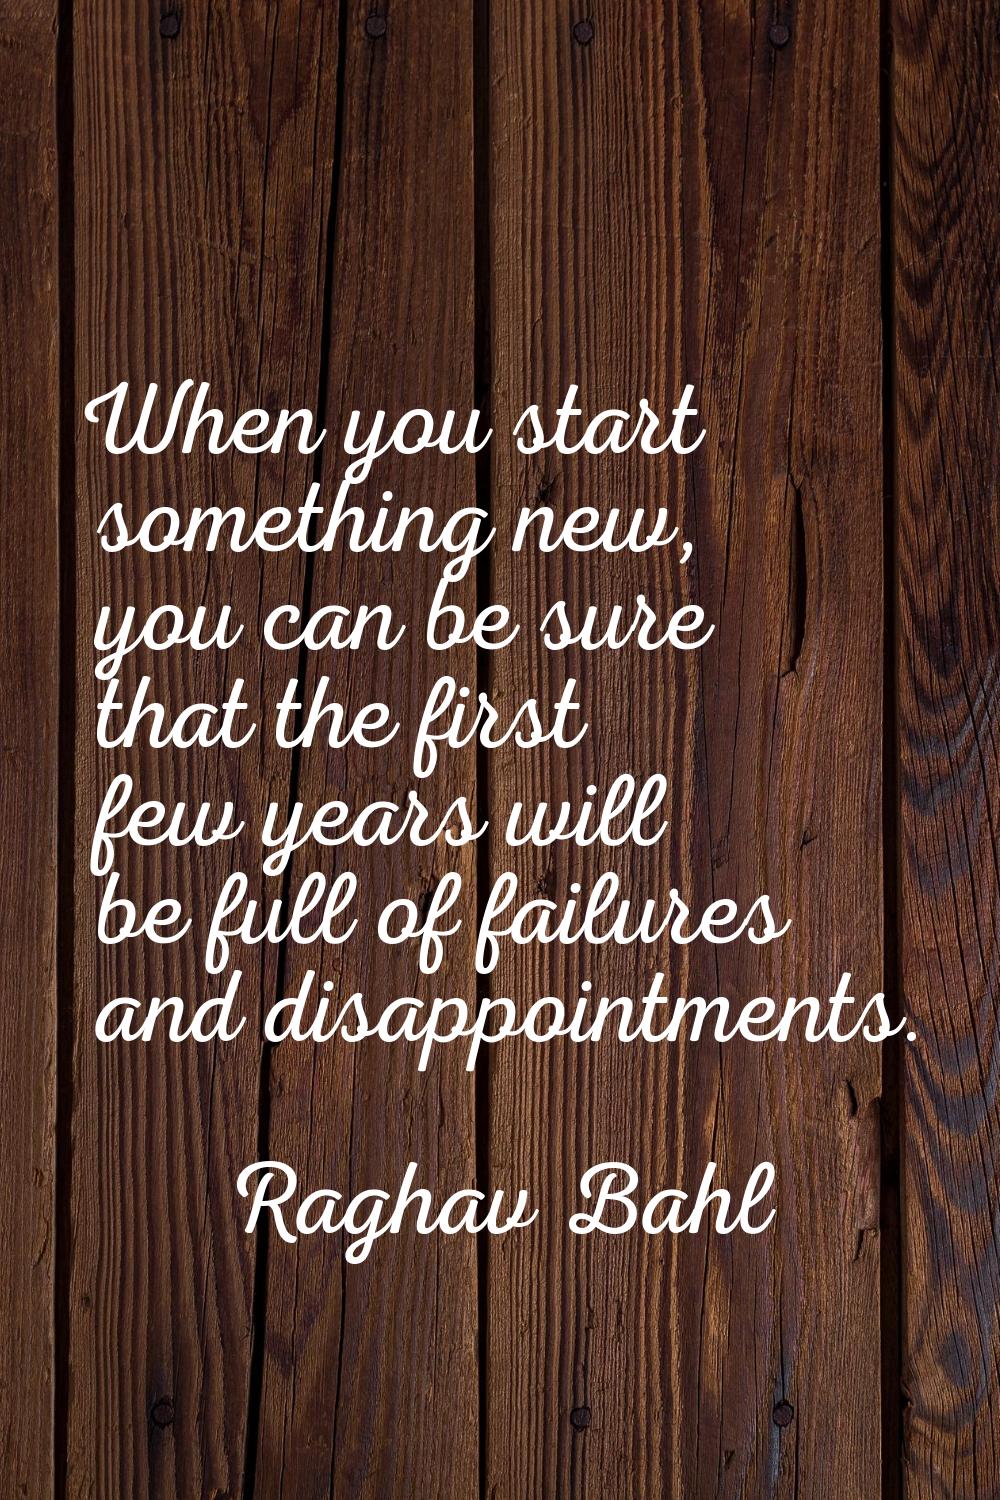 When you start something new, you can be sure that the first few years will be full of failures and